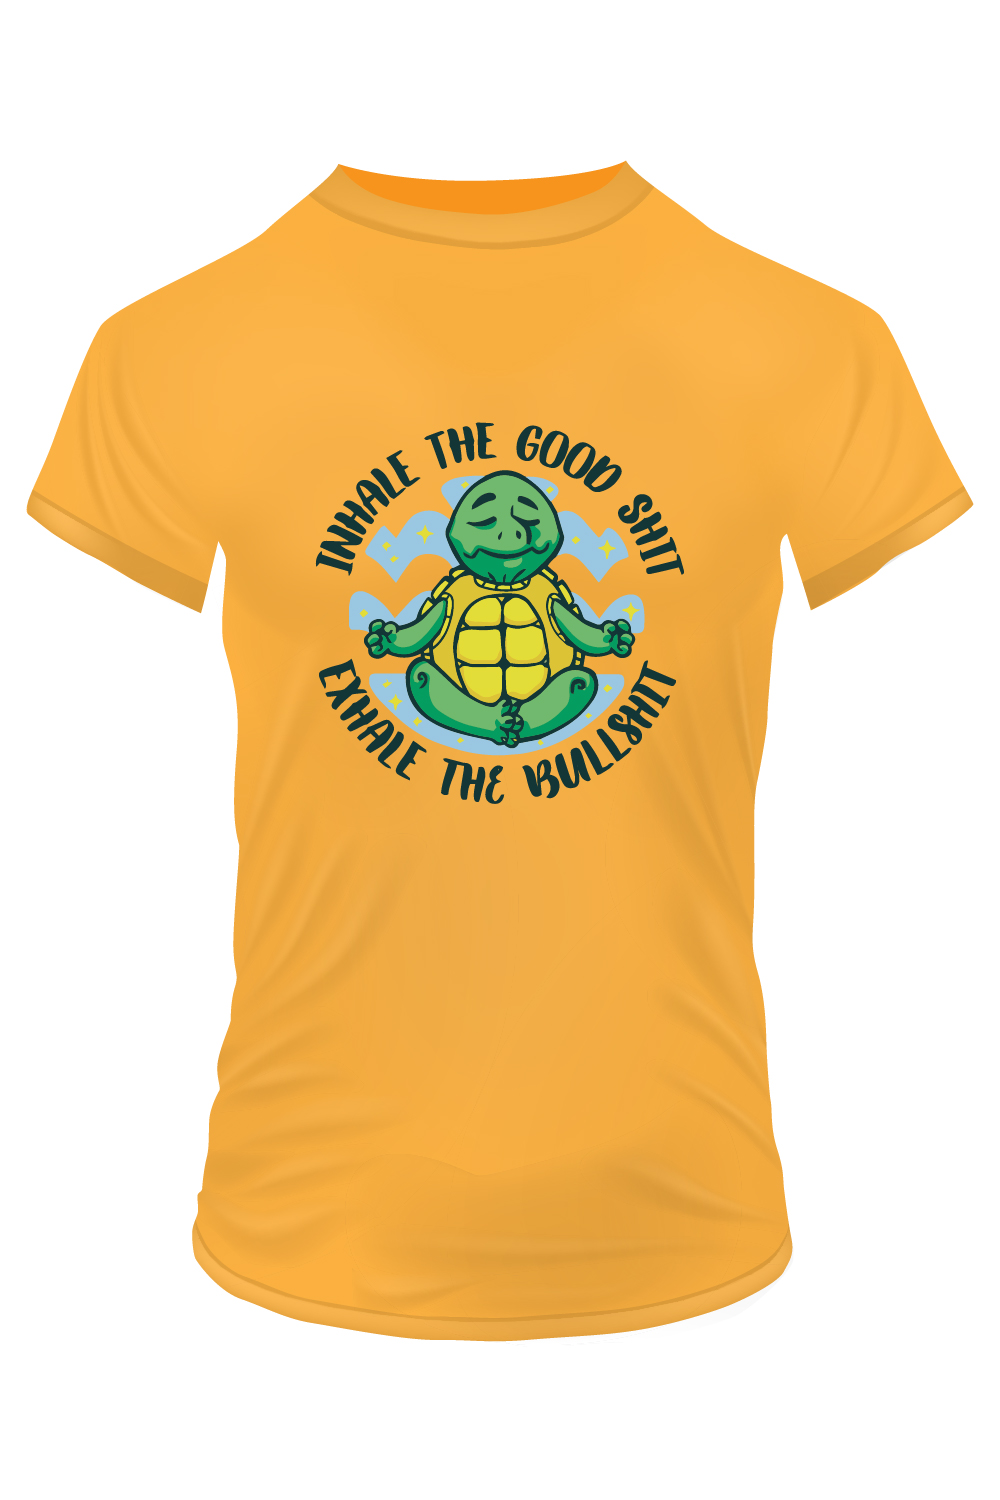 Inhale the good shit, exhale the bullshit Funny quote meditating turtle Vector illustration T-shirt Design pinterest preview image.